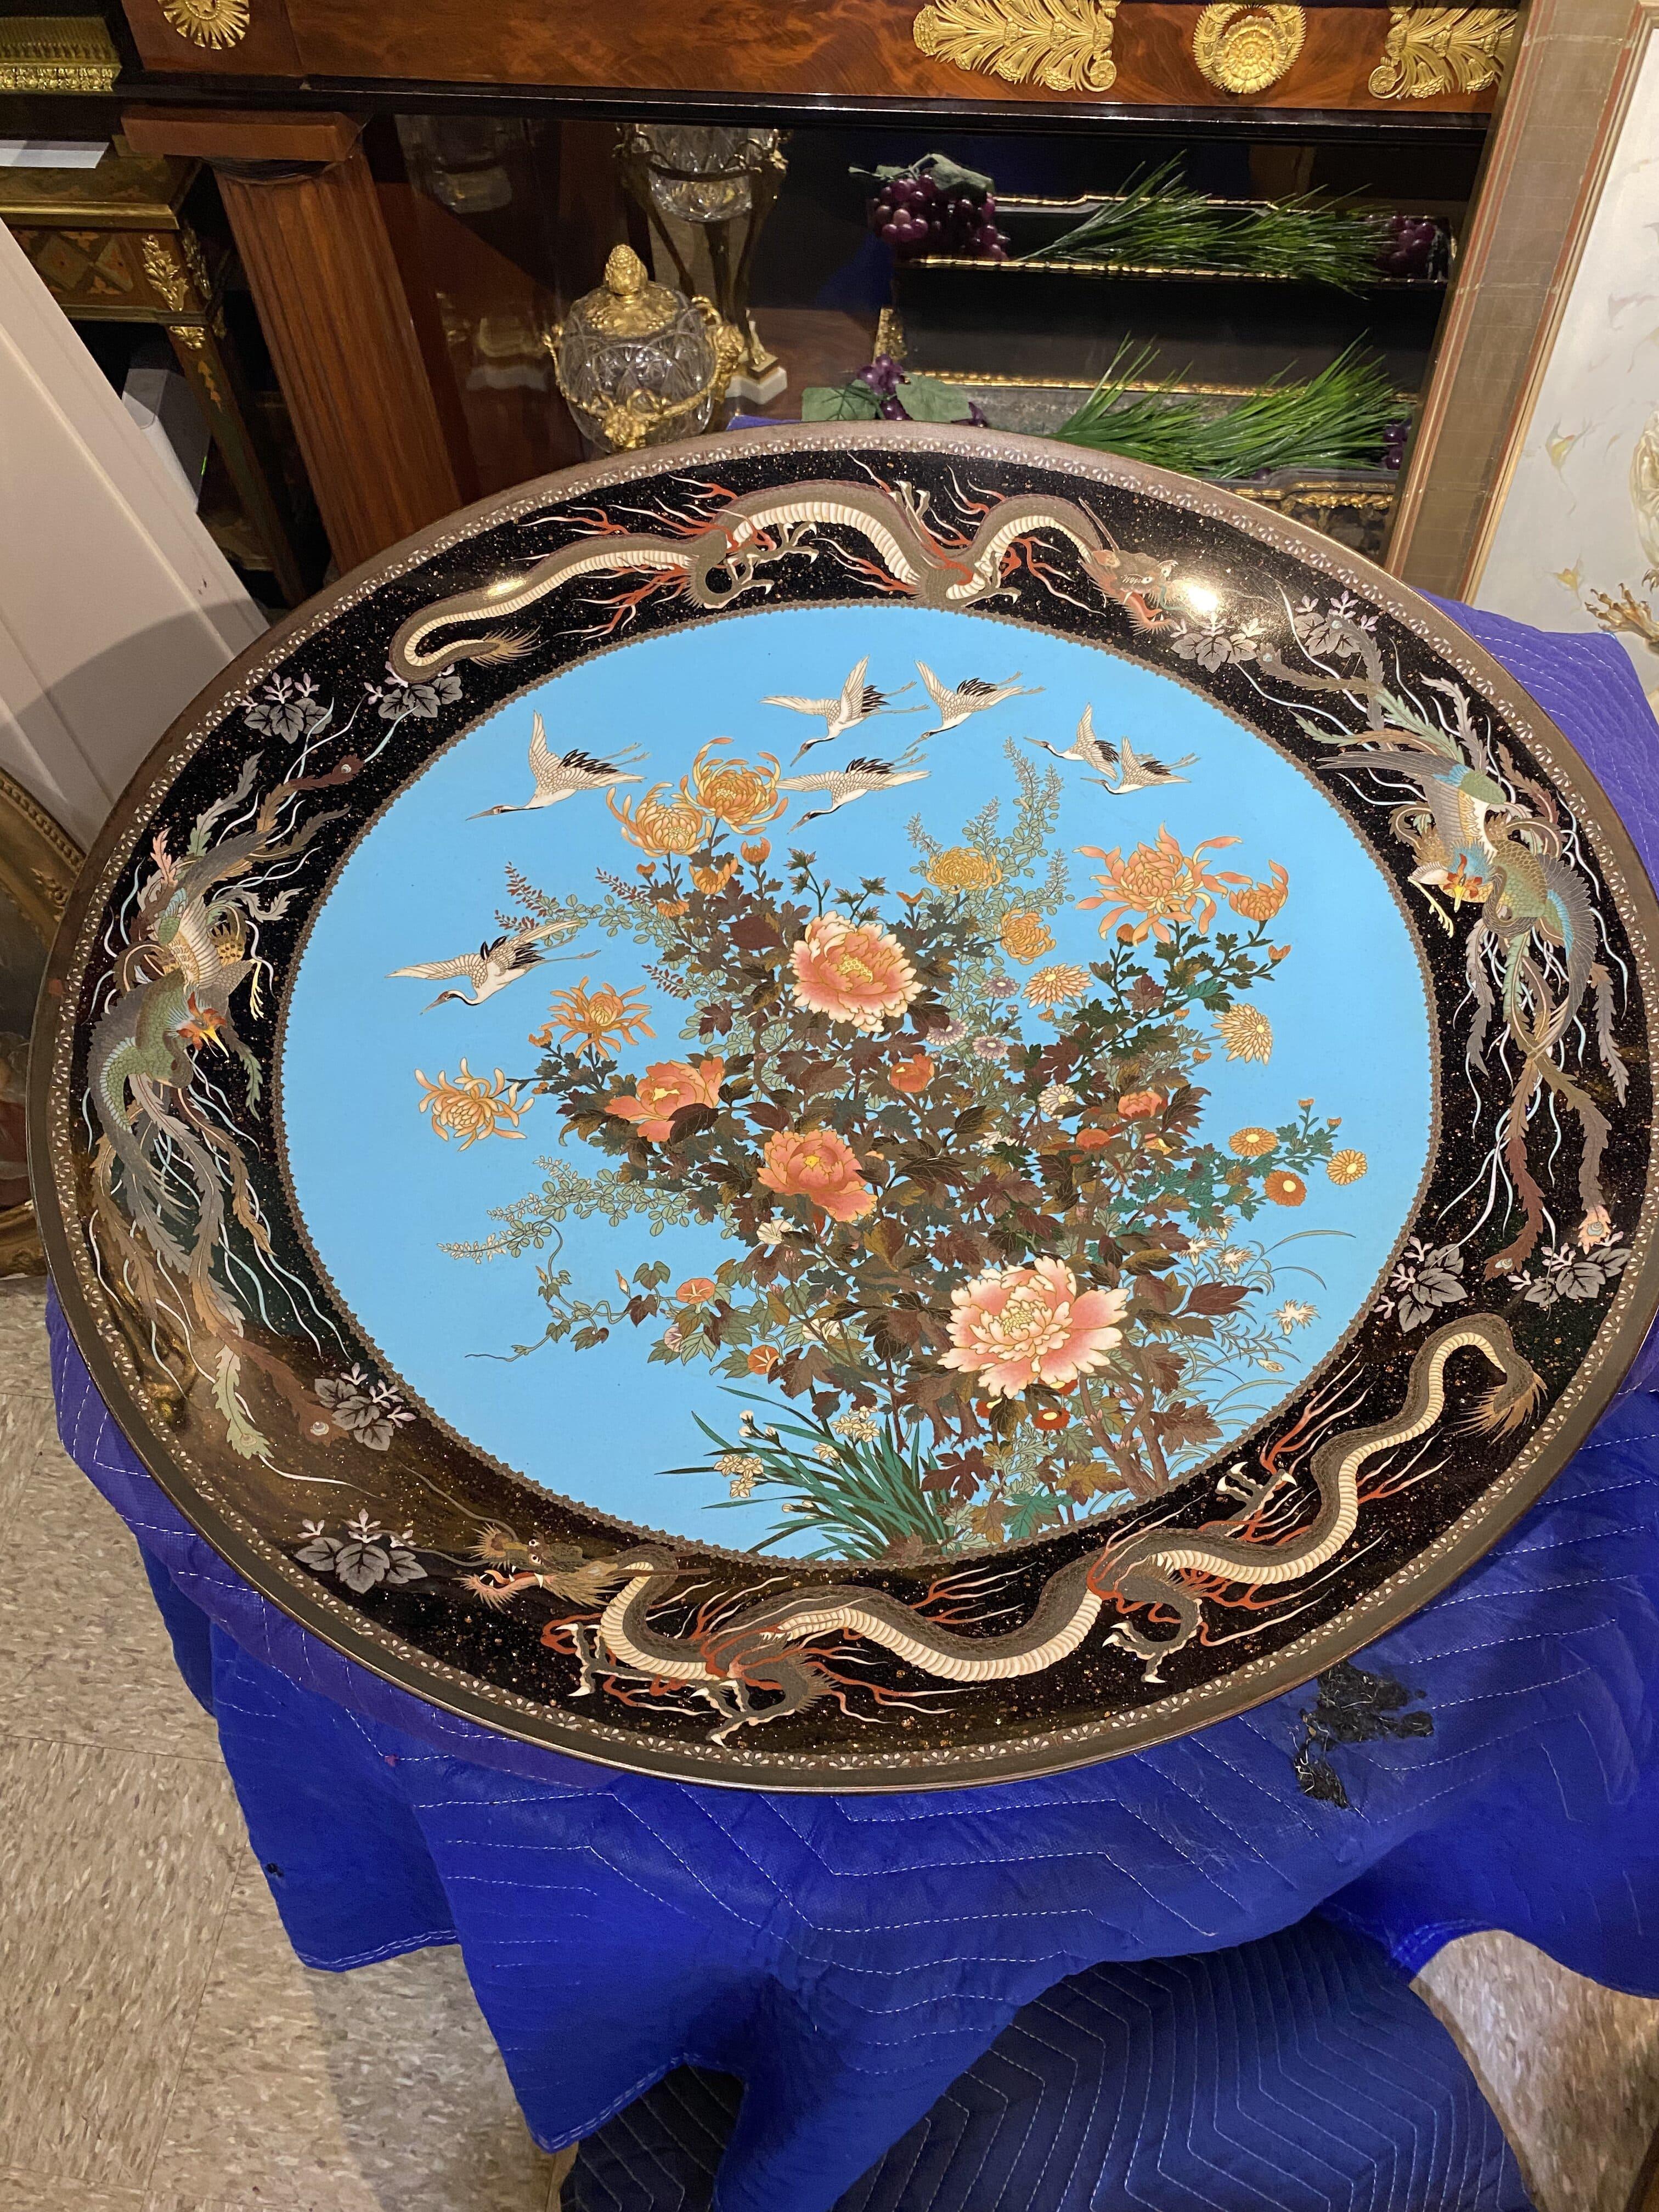 Massive Museum Pair of Meiji Period Japanese Cloisonne Enamel Chargers Plates For Sale 3